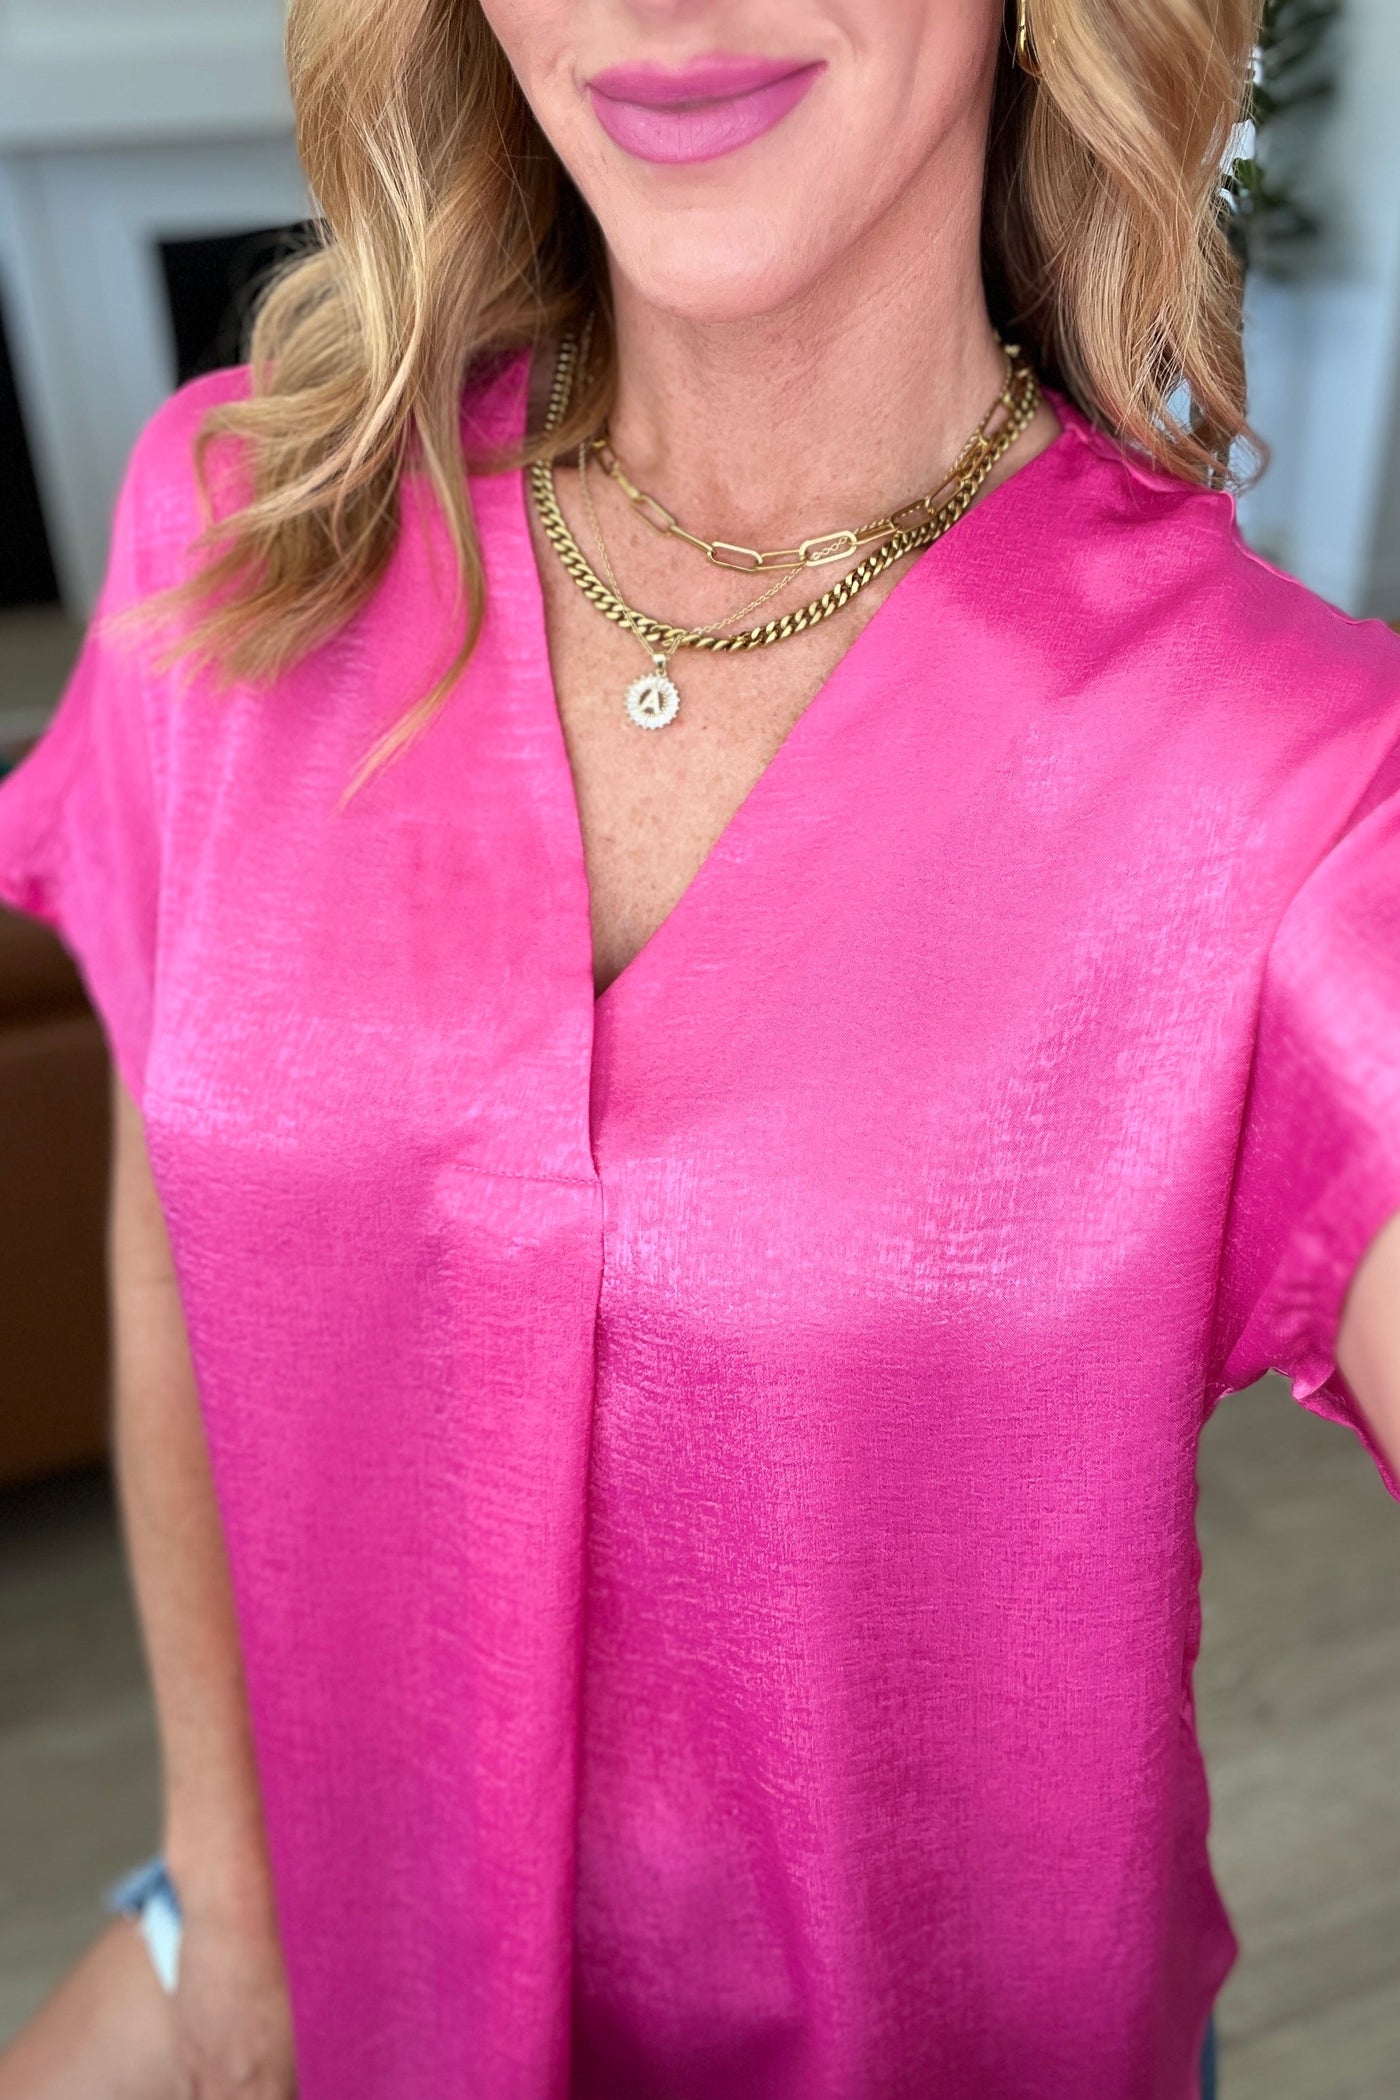 Pleat Front V-Neck Top in Hot Pink-Tops-Ave Shops-Market Street Nest, Fashionable Clothing, Shoes and Home Décor Located in Mabank, TX